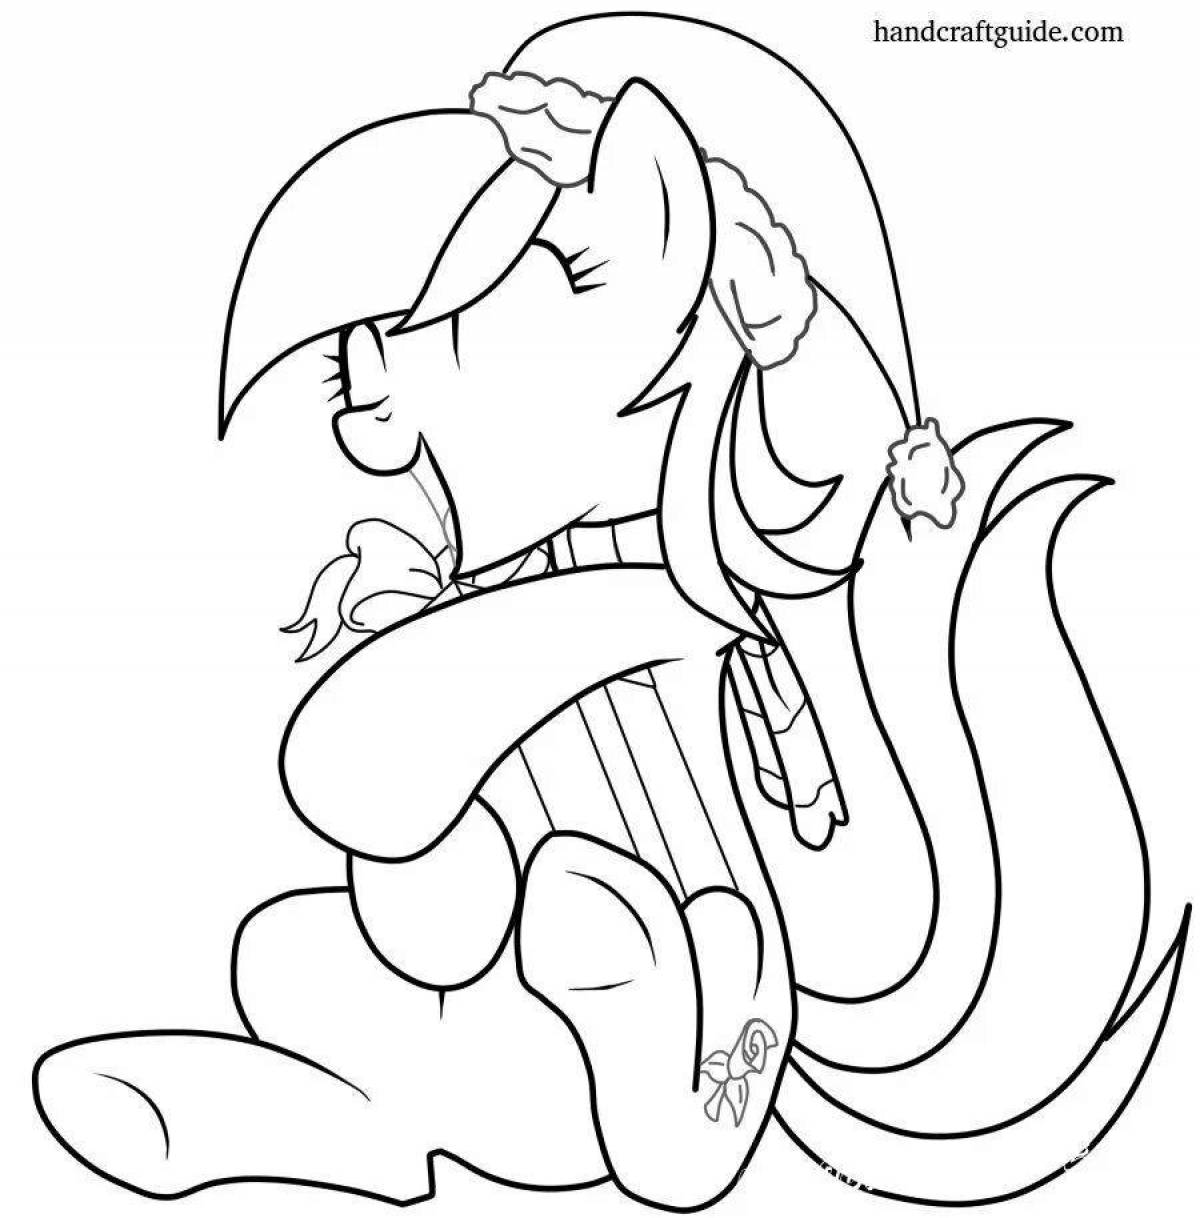 Awesome pony coloring page